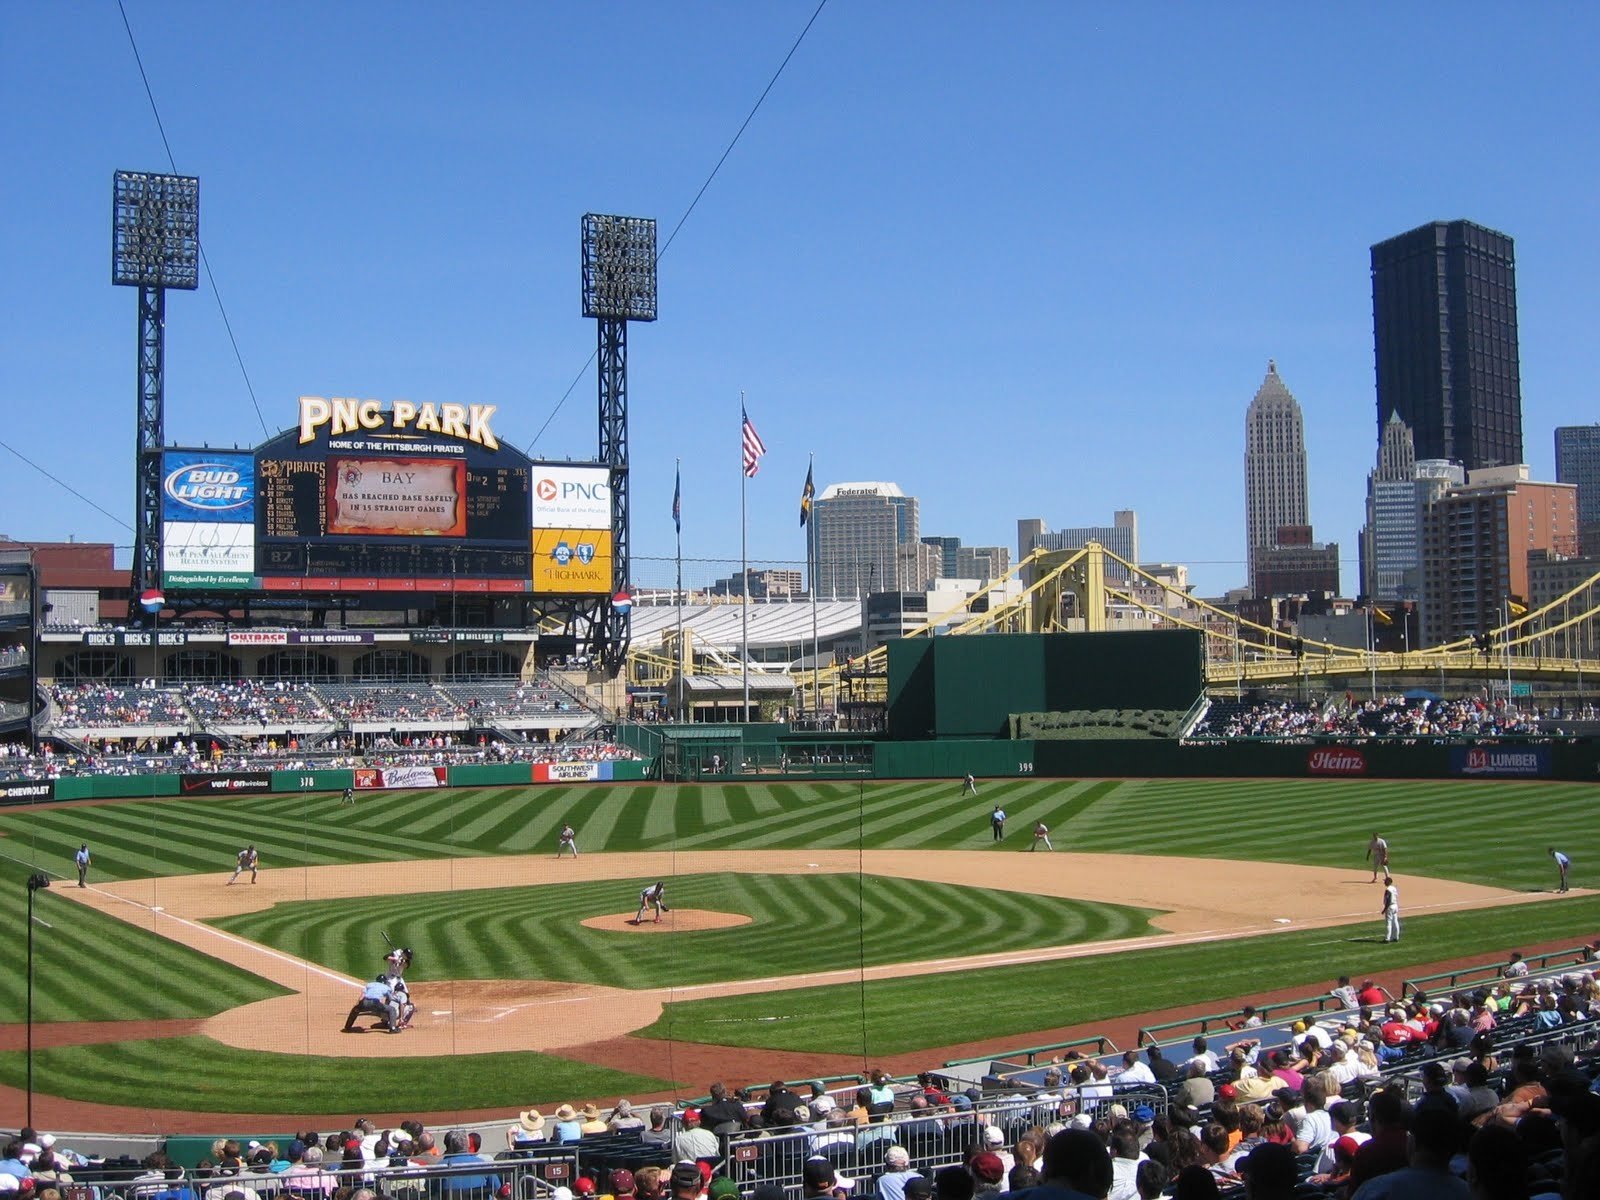 Awesome Pnc Park Picture